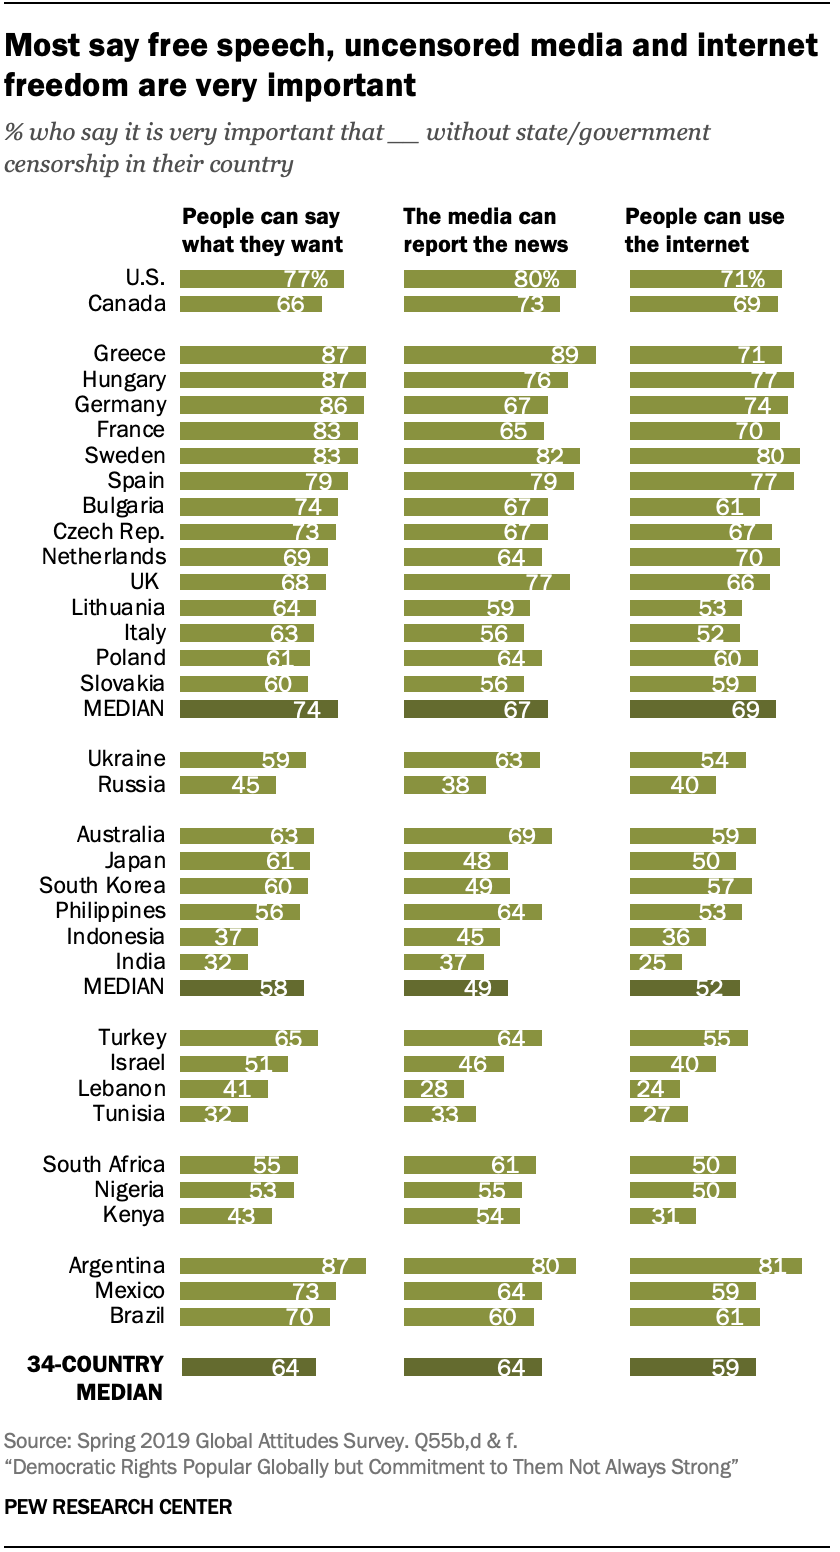 Chart shows most say free speech, uncensored media and internet freedom are very important